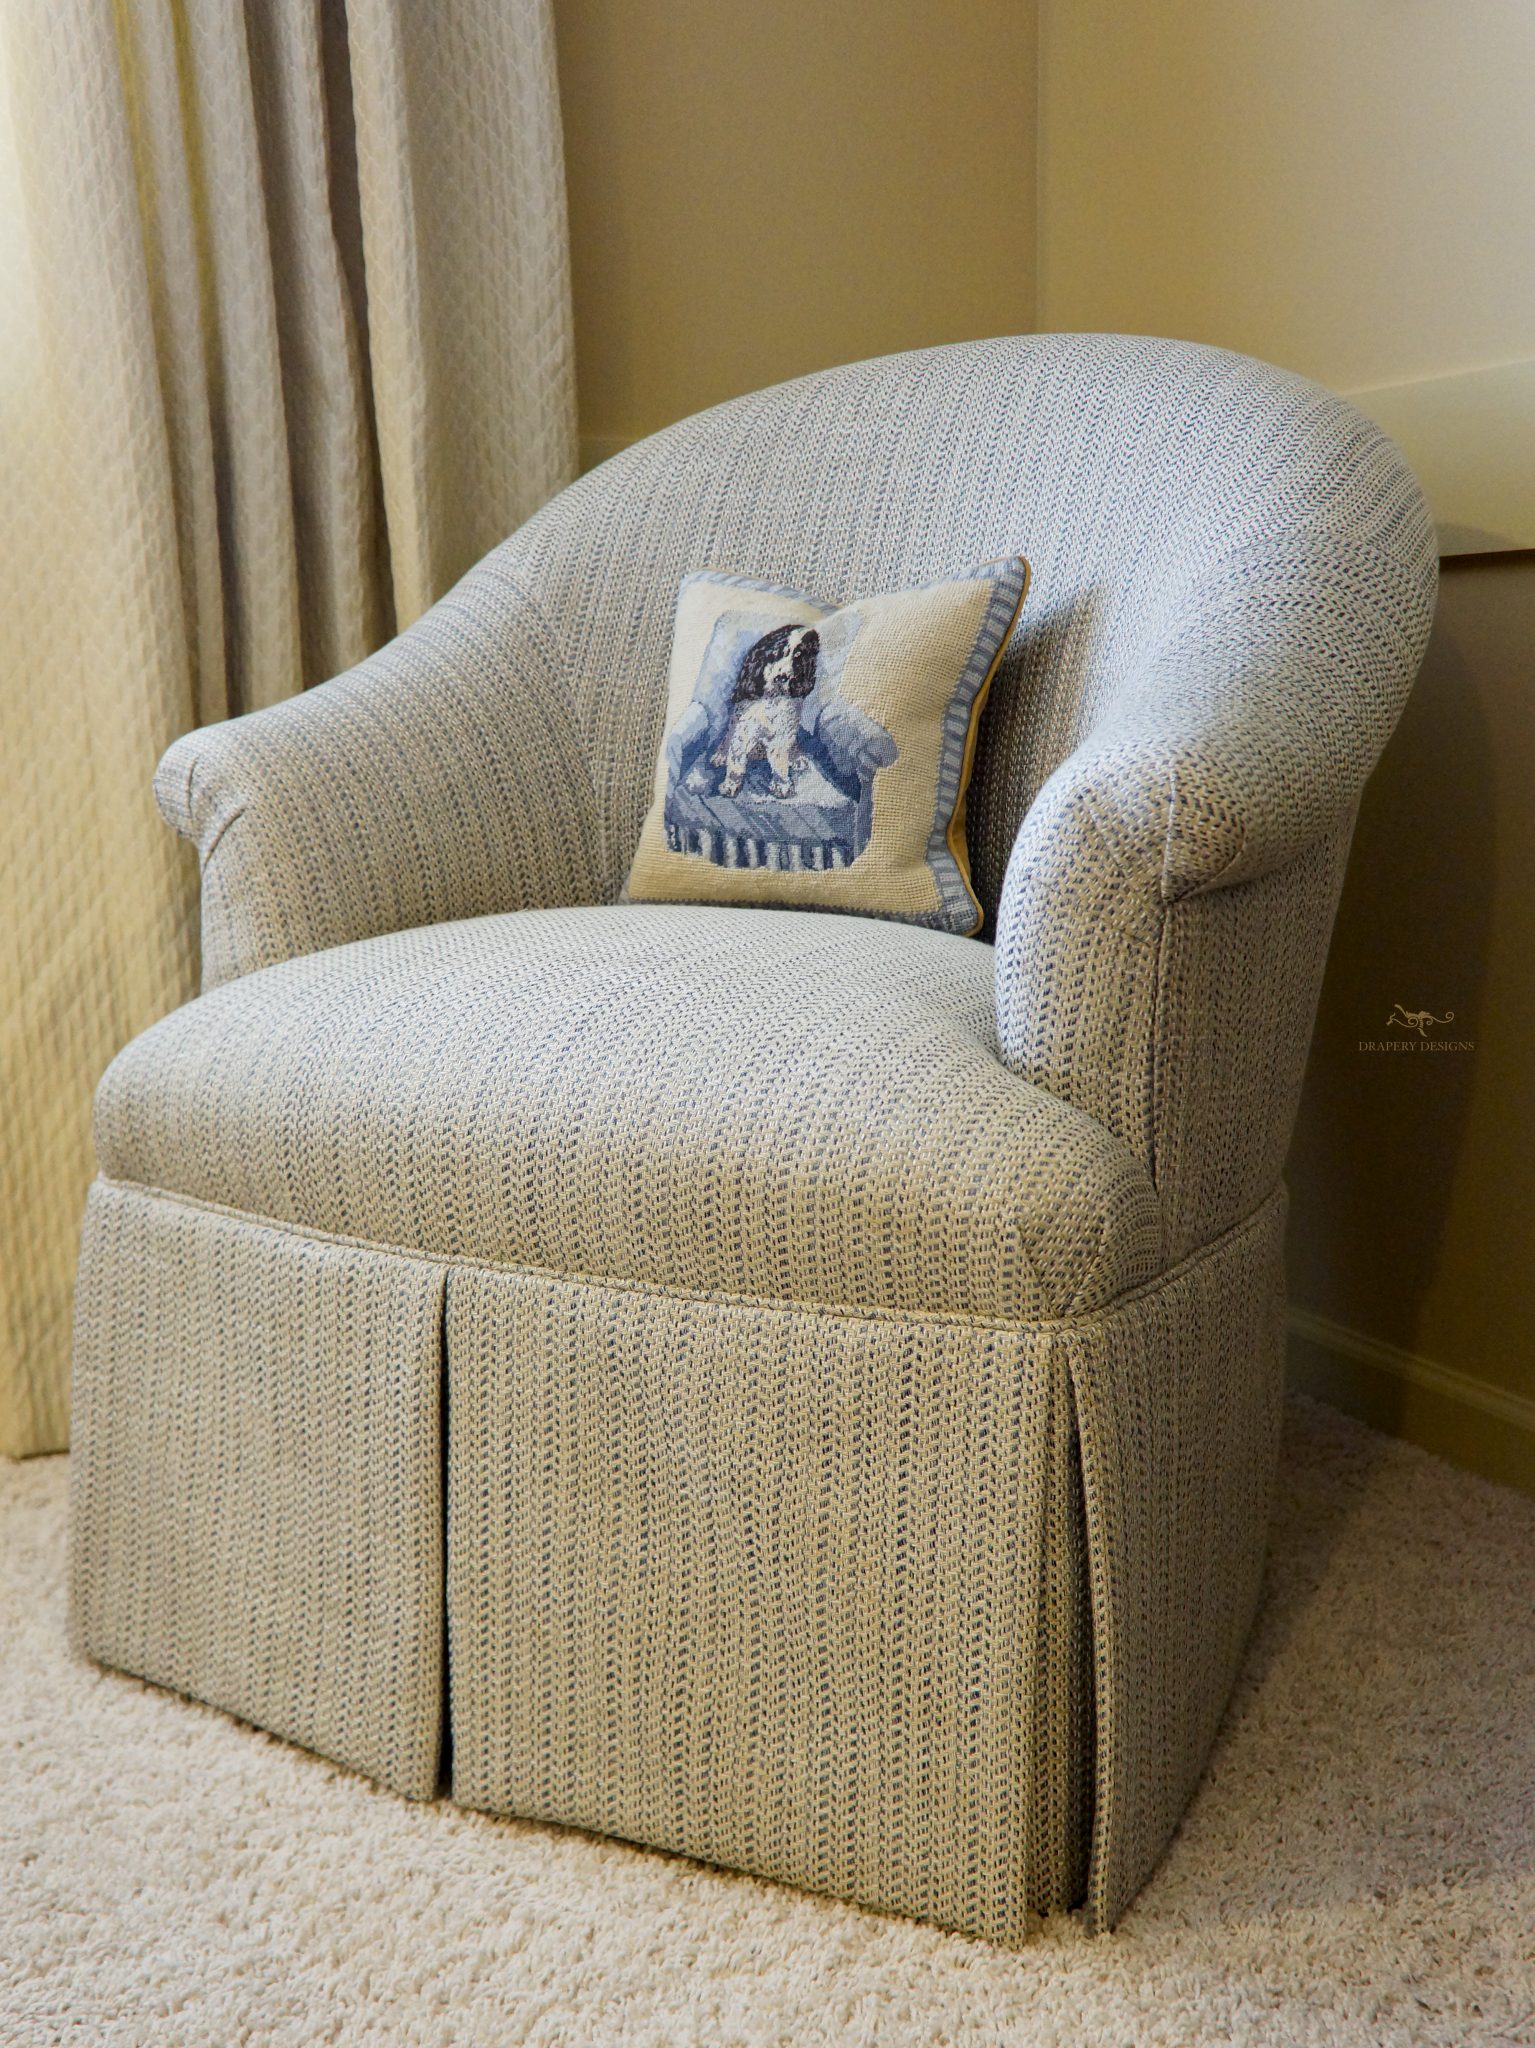 Re-upholstered Barrel Chair